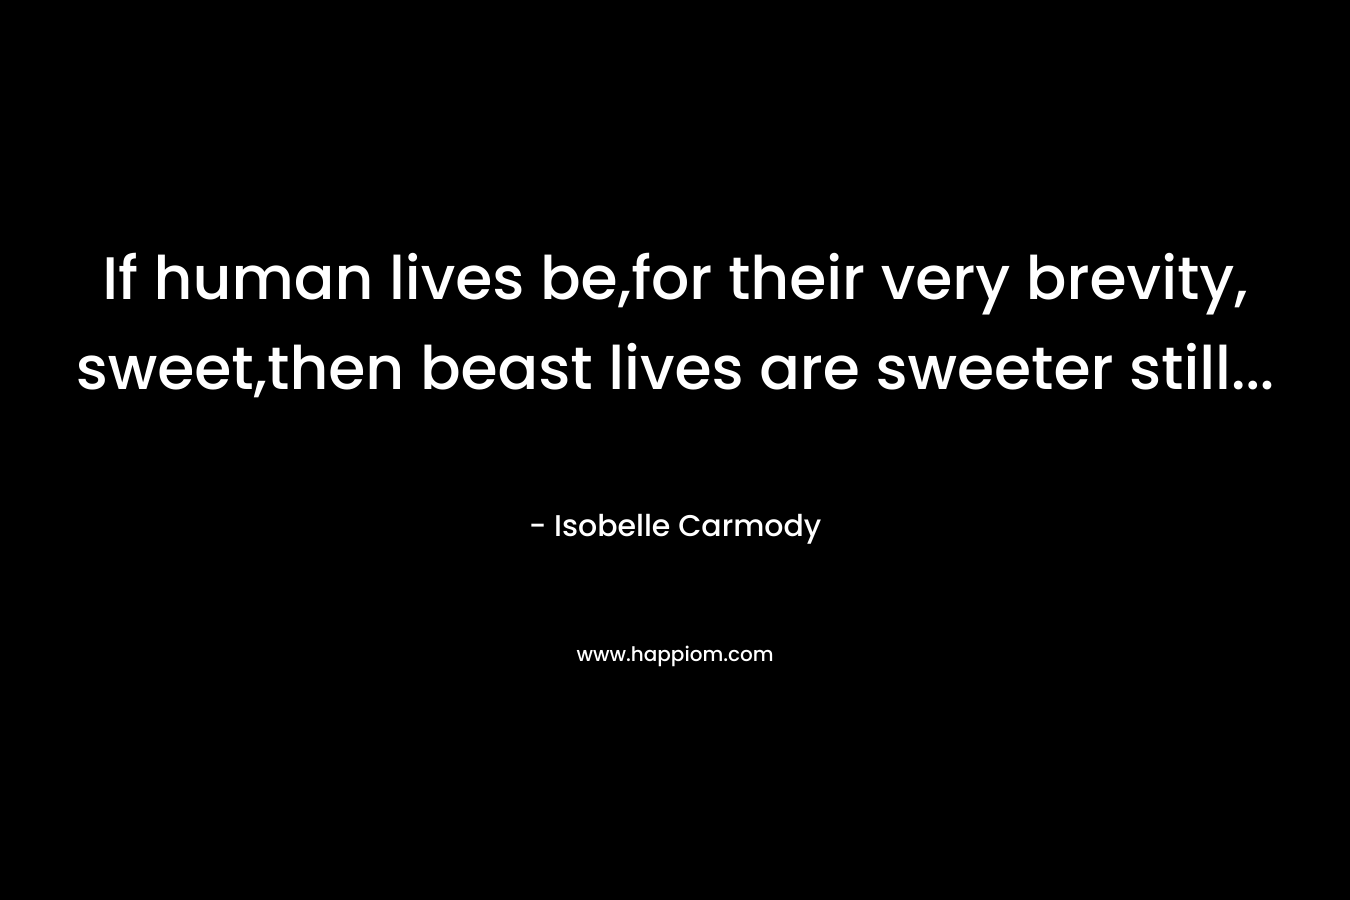 If human lives be,for their very brevity, sweet,then beast lives are sweeter still… – Isobelle Carmody